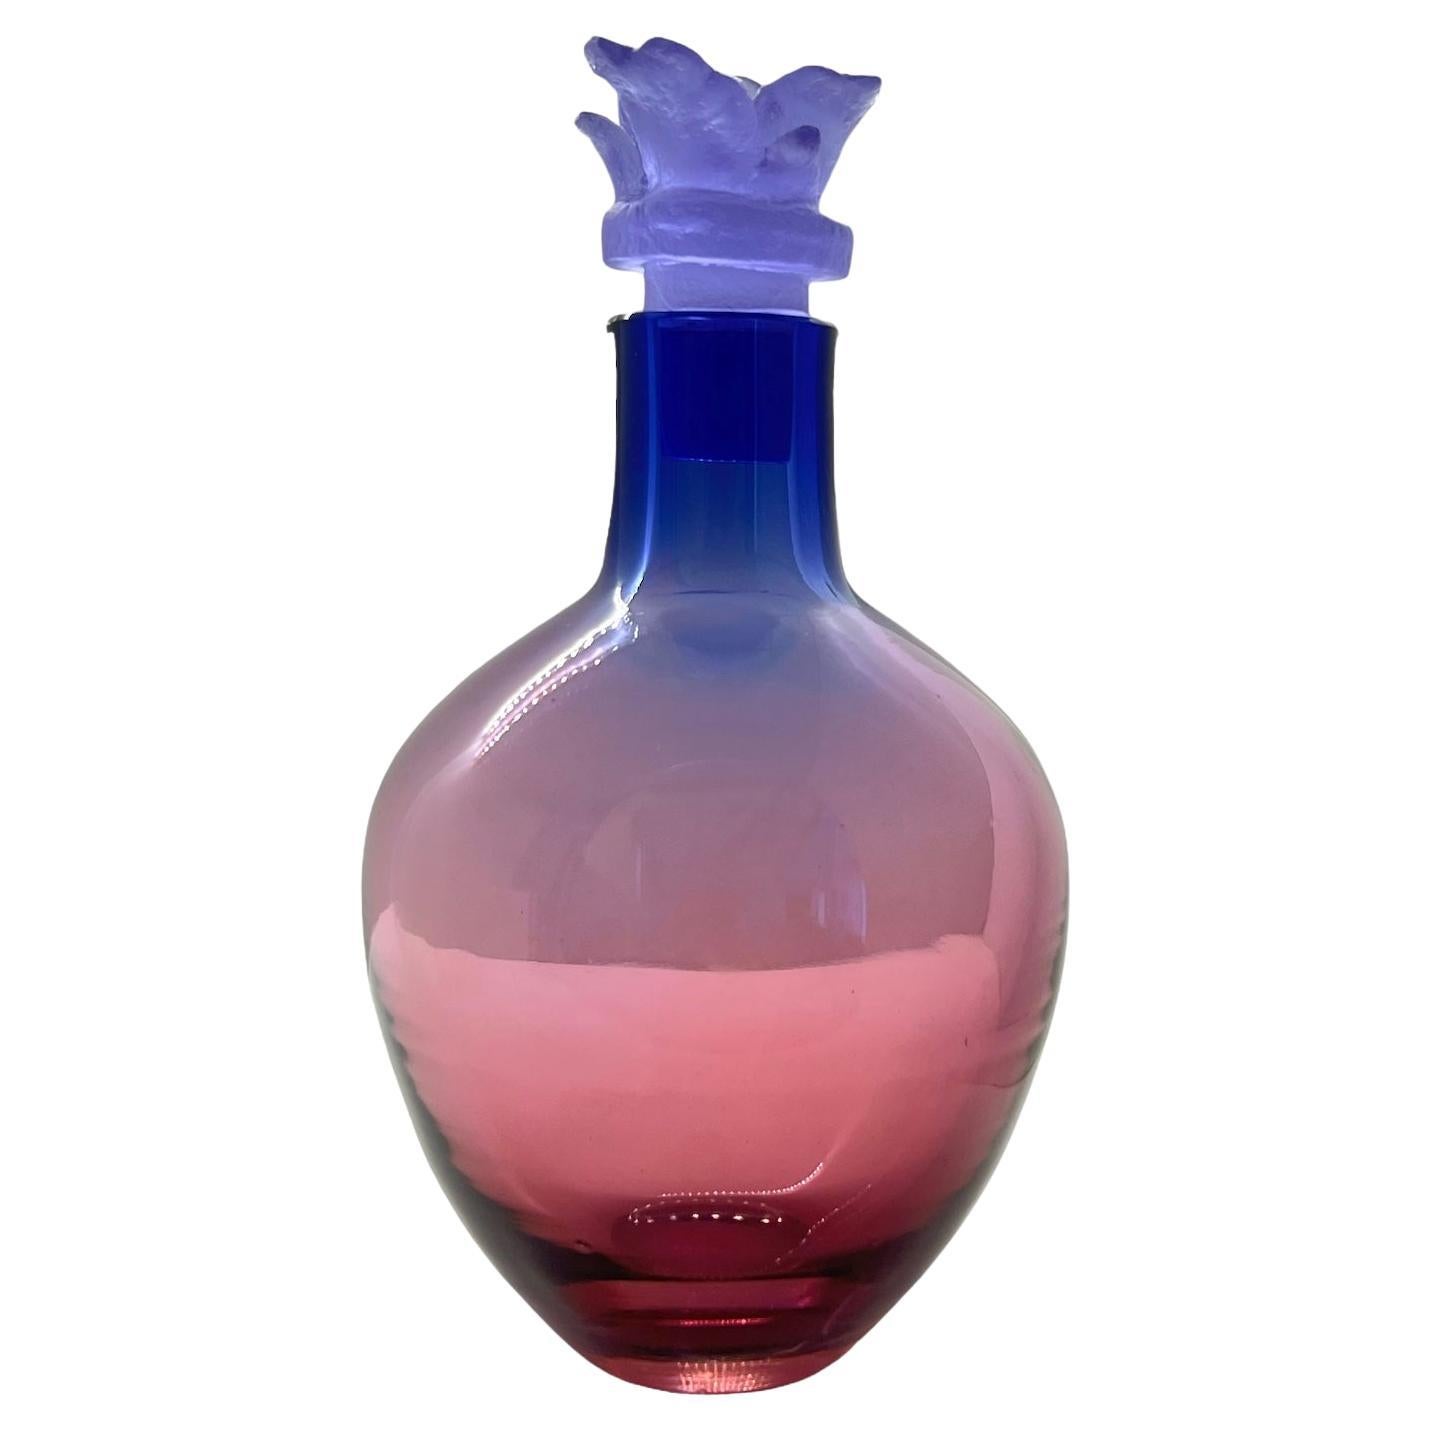 Liquor Decanter in Pink Violet Blue Glass with Hand Crafted Lilac Stopper For Sale